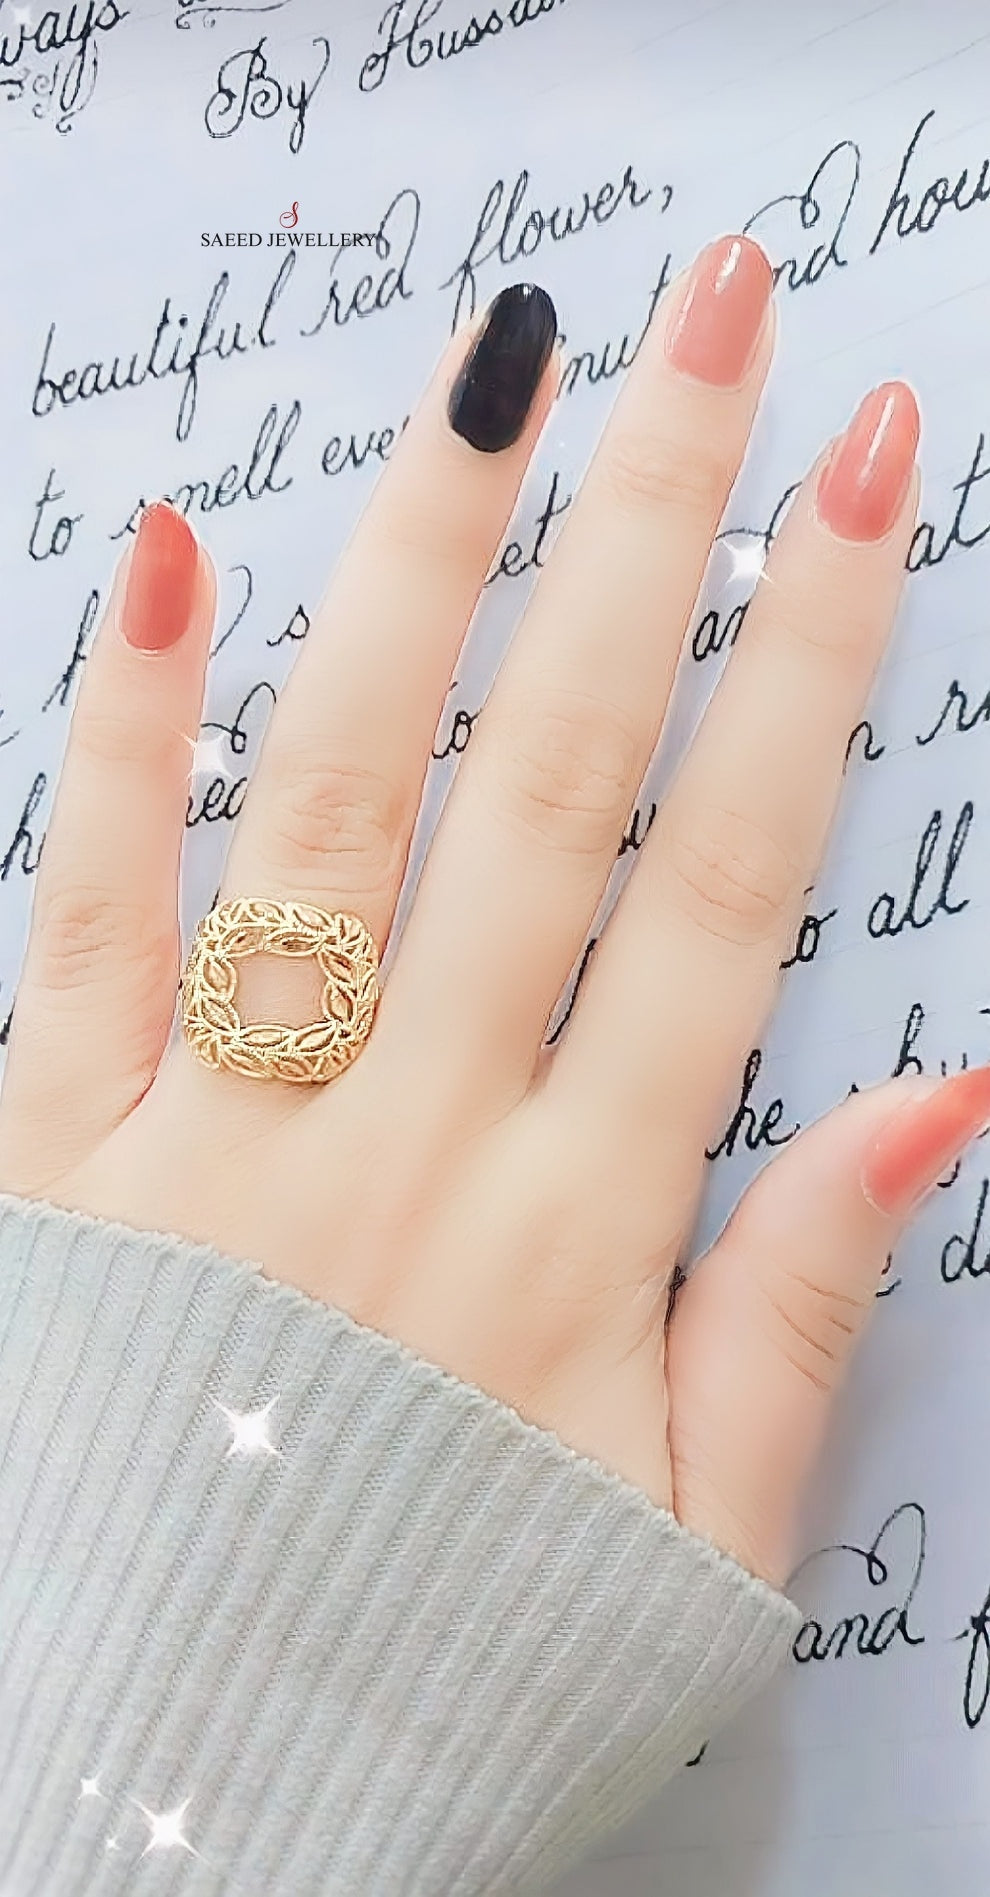 21K Gold Leaf Ring by Saeed Jewelry - Image 2